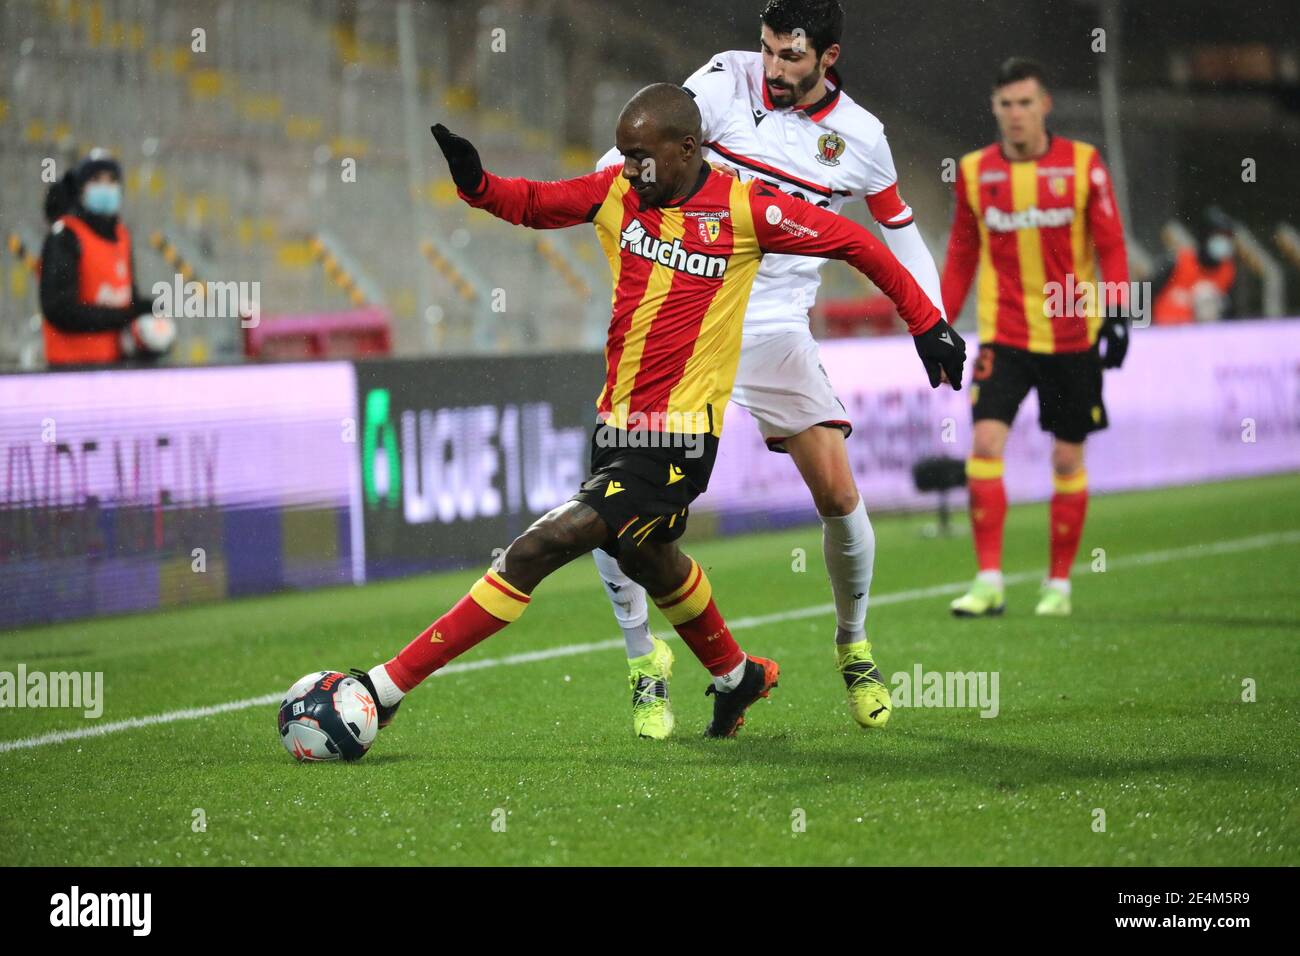 Duel Kakuta 10 Lens and Lees-Melou 8 Nice during the French championship Ligue  1 football match between RC Lens and OGC Nice o / LM Stock Photo - Alamy